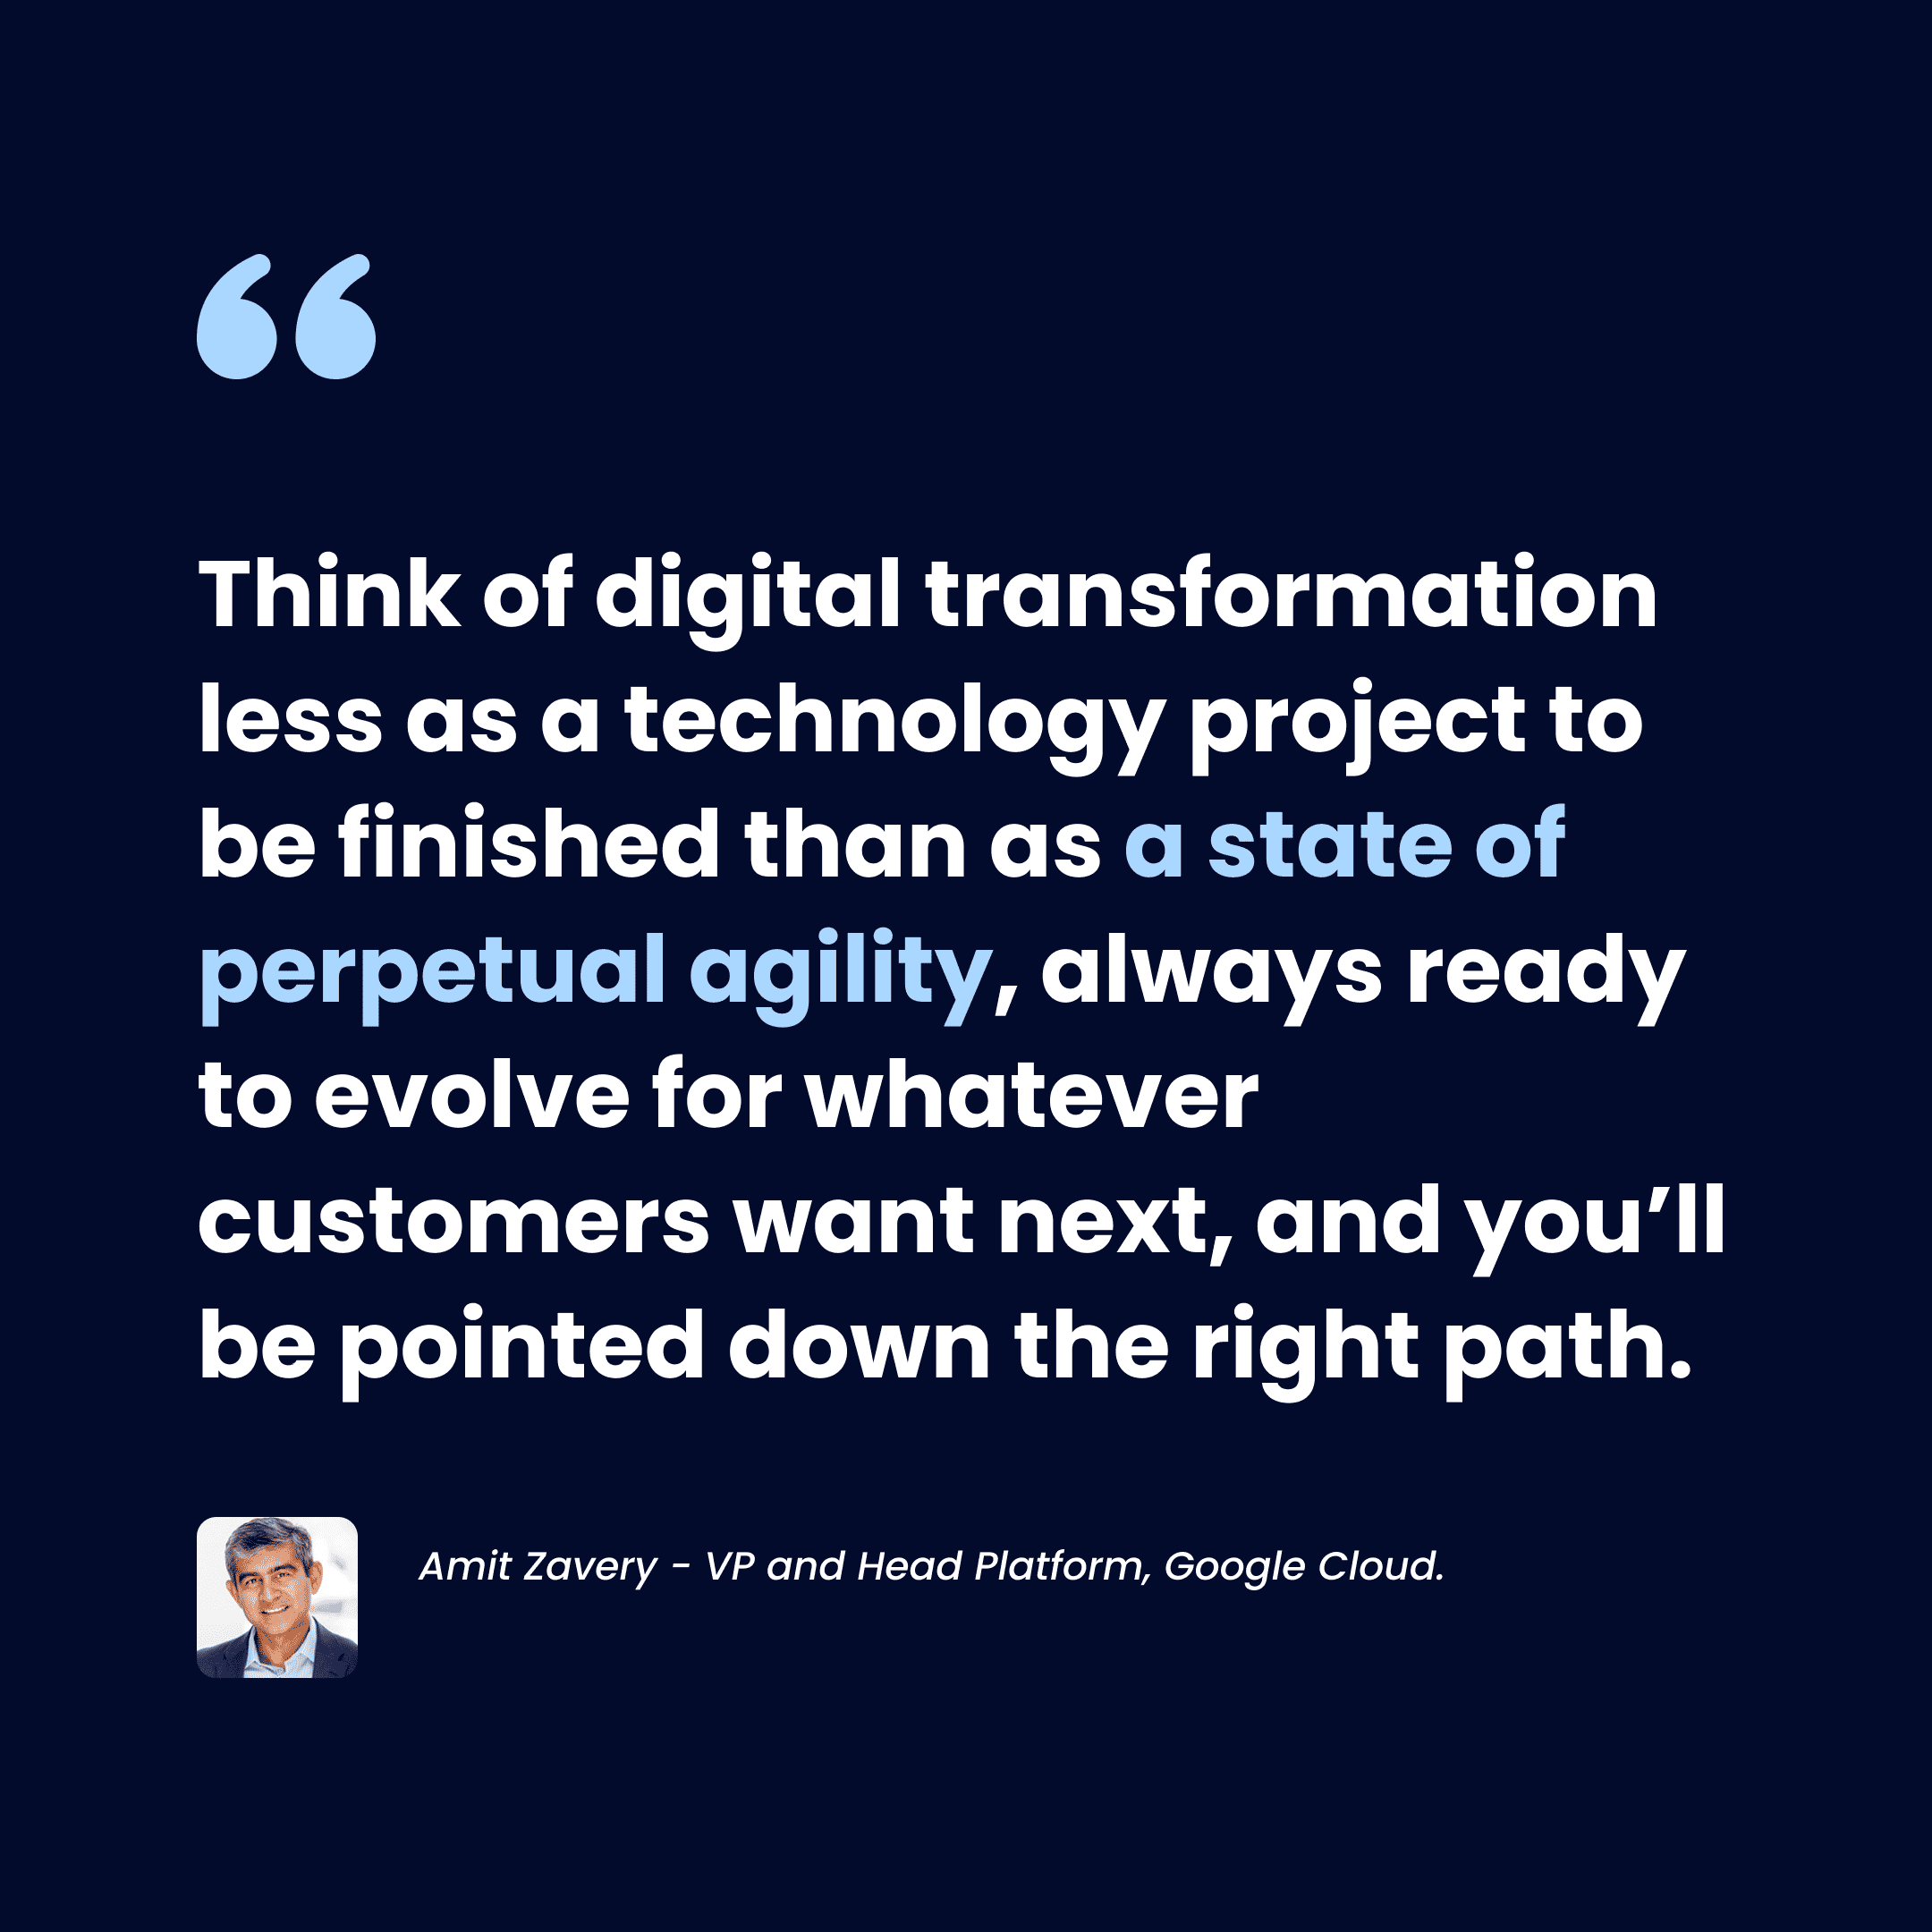 Quote from Amit Zavery, vice president and head of Platform, Google Cloud.